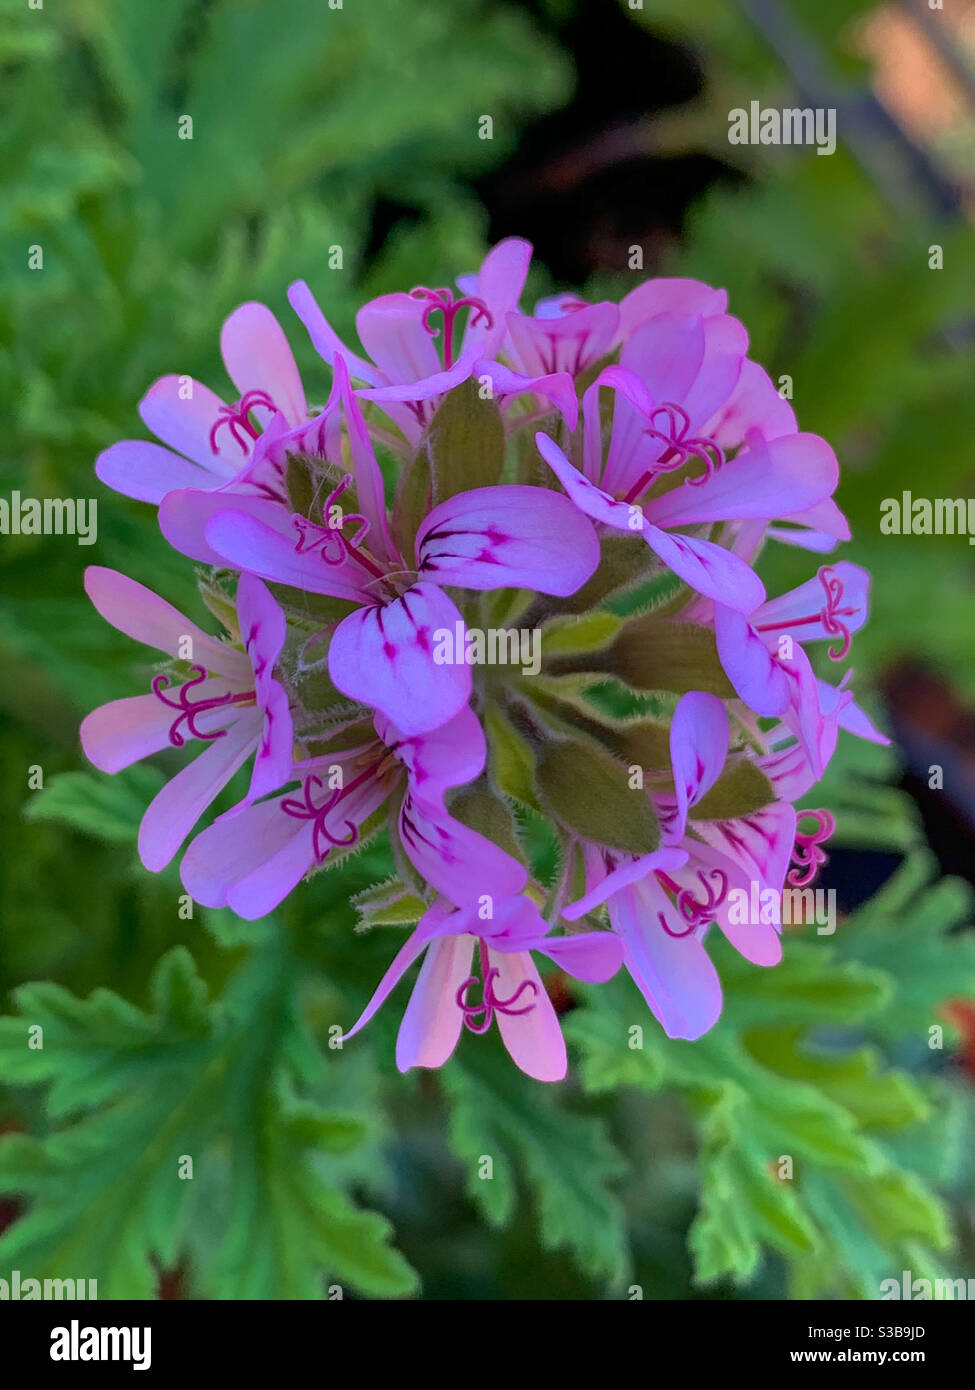 A Delicate cluster of pink  pelargonium flowers against the green foliage Stock Photo